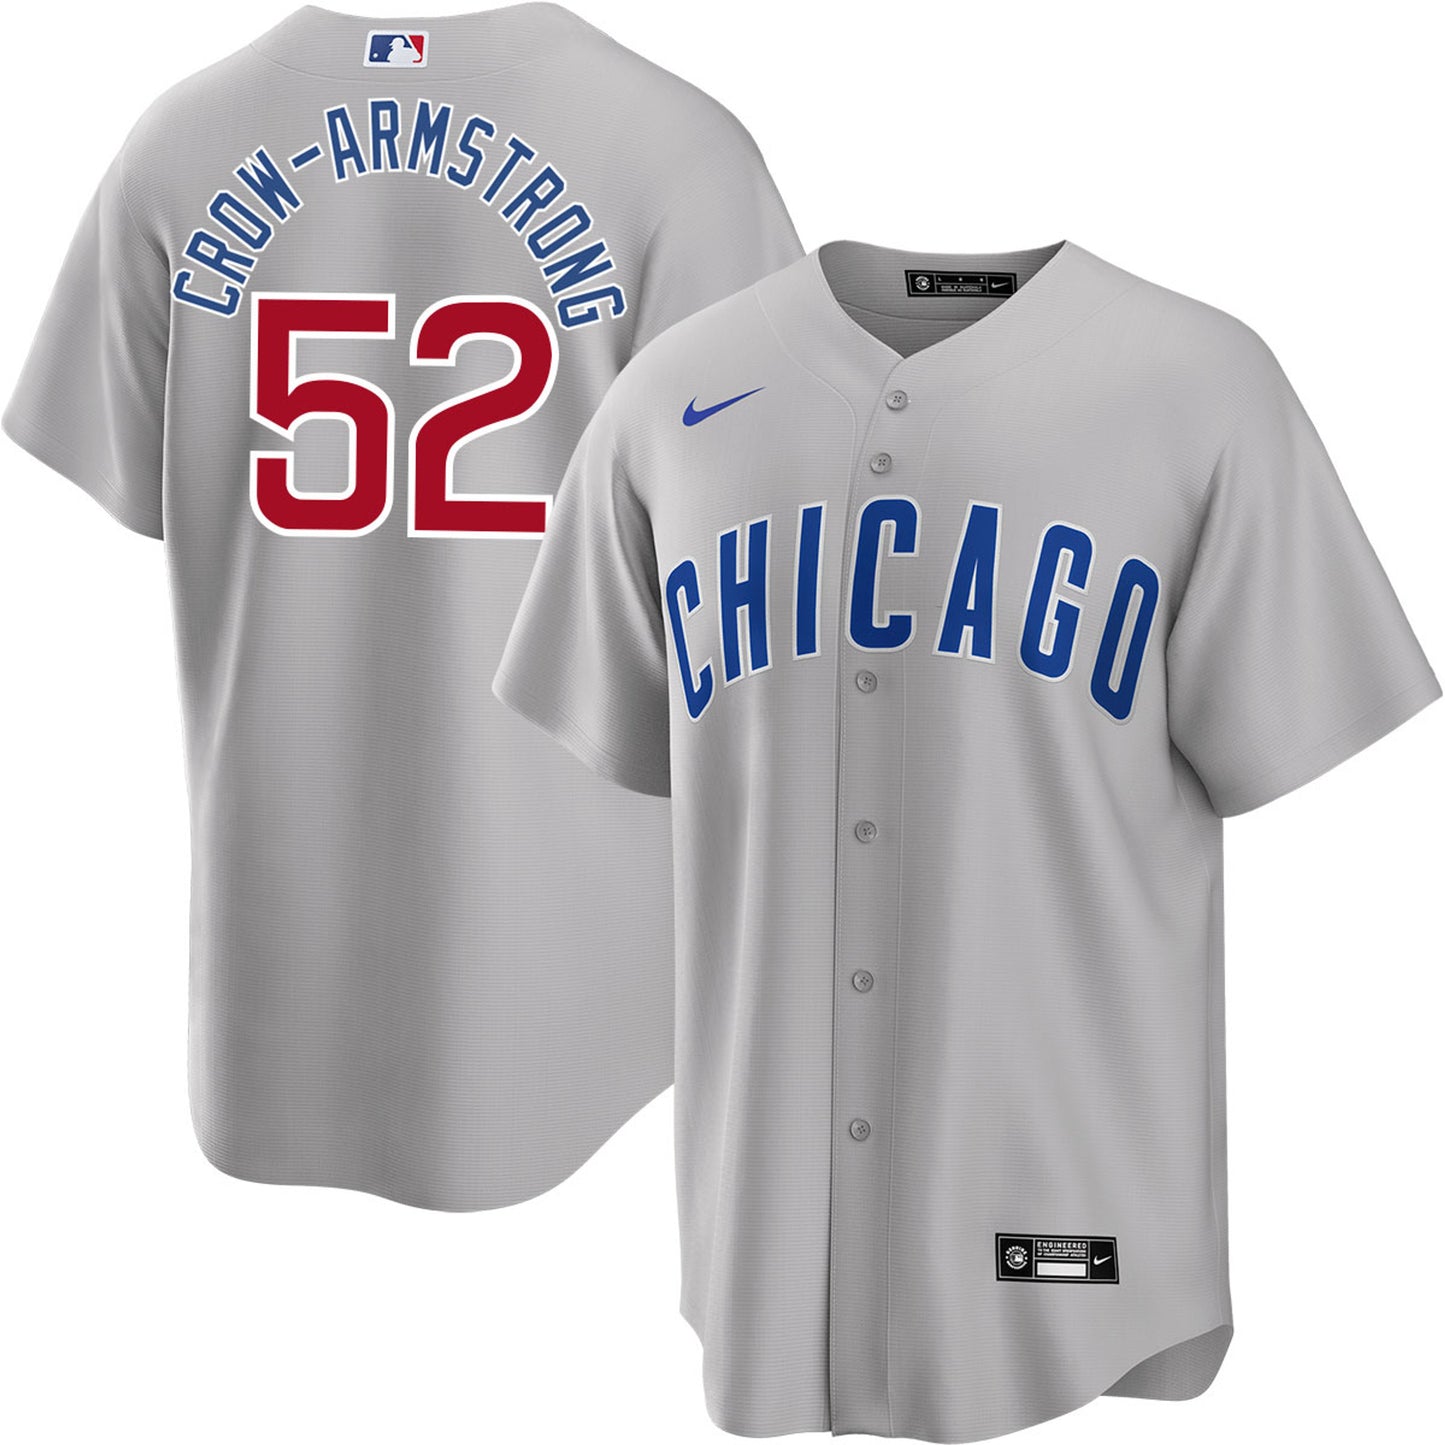 Men's  Chicago Cubs Pete Crow-Armstrong Player Jersey